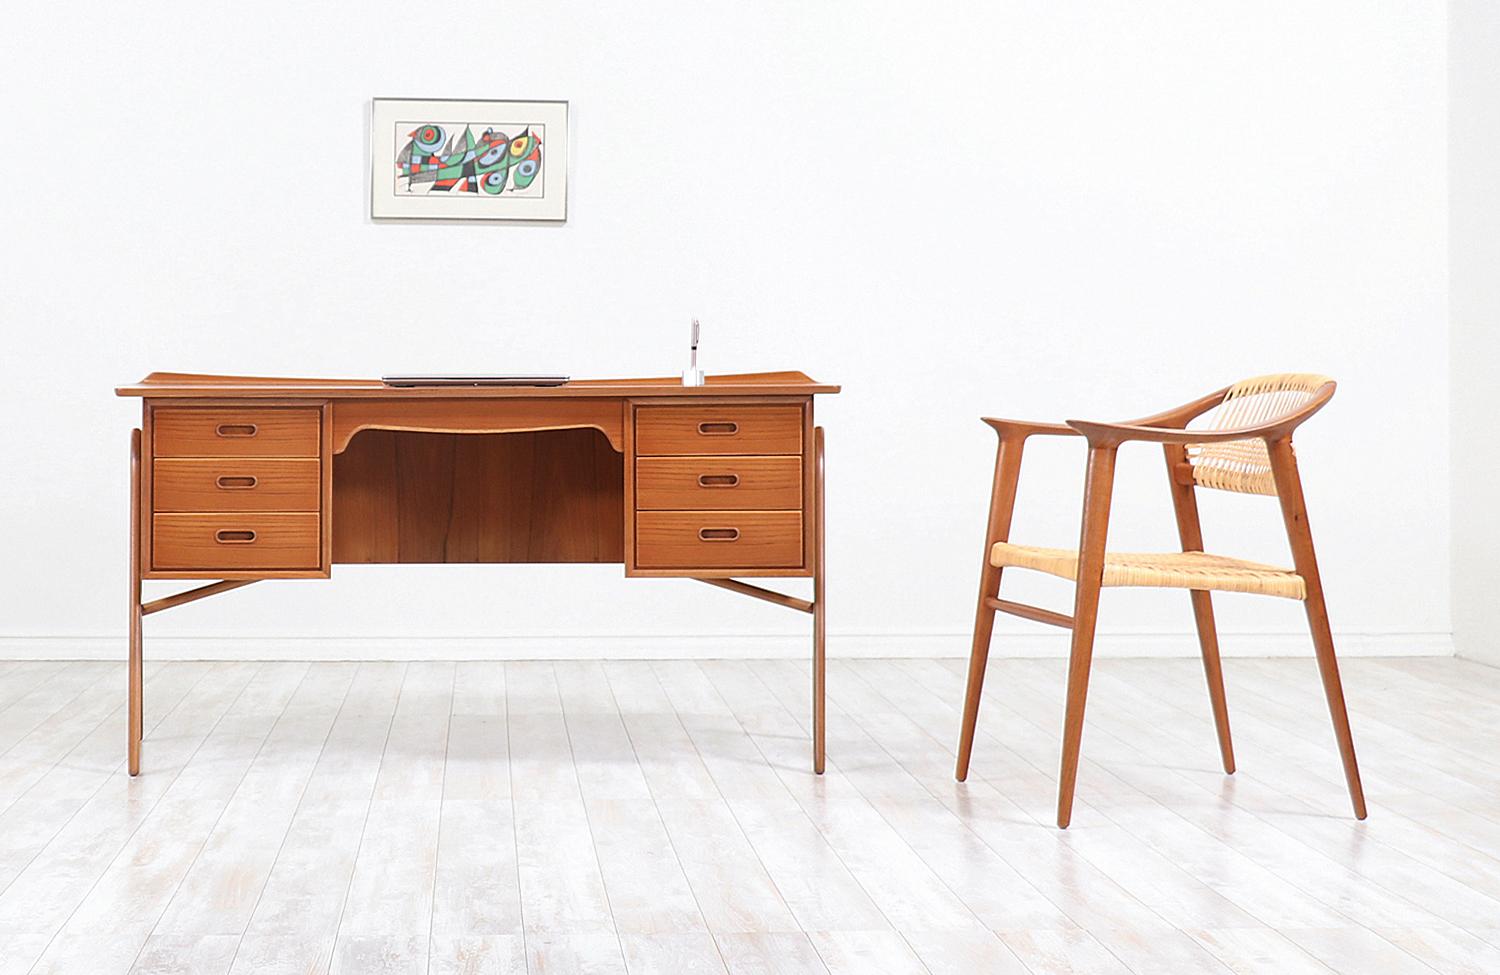 Striking executive desk designed by architect Svend A. Madsen for H.P. Hansen Møbelindustri in Denmark circa 1960s. This iconic design is meticulously crafted in teak wood and is suspended in boomerang legs epitomizing Madsen’s minimal and classic